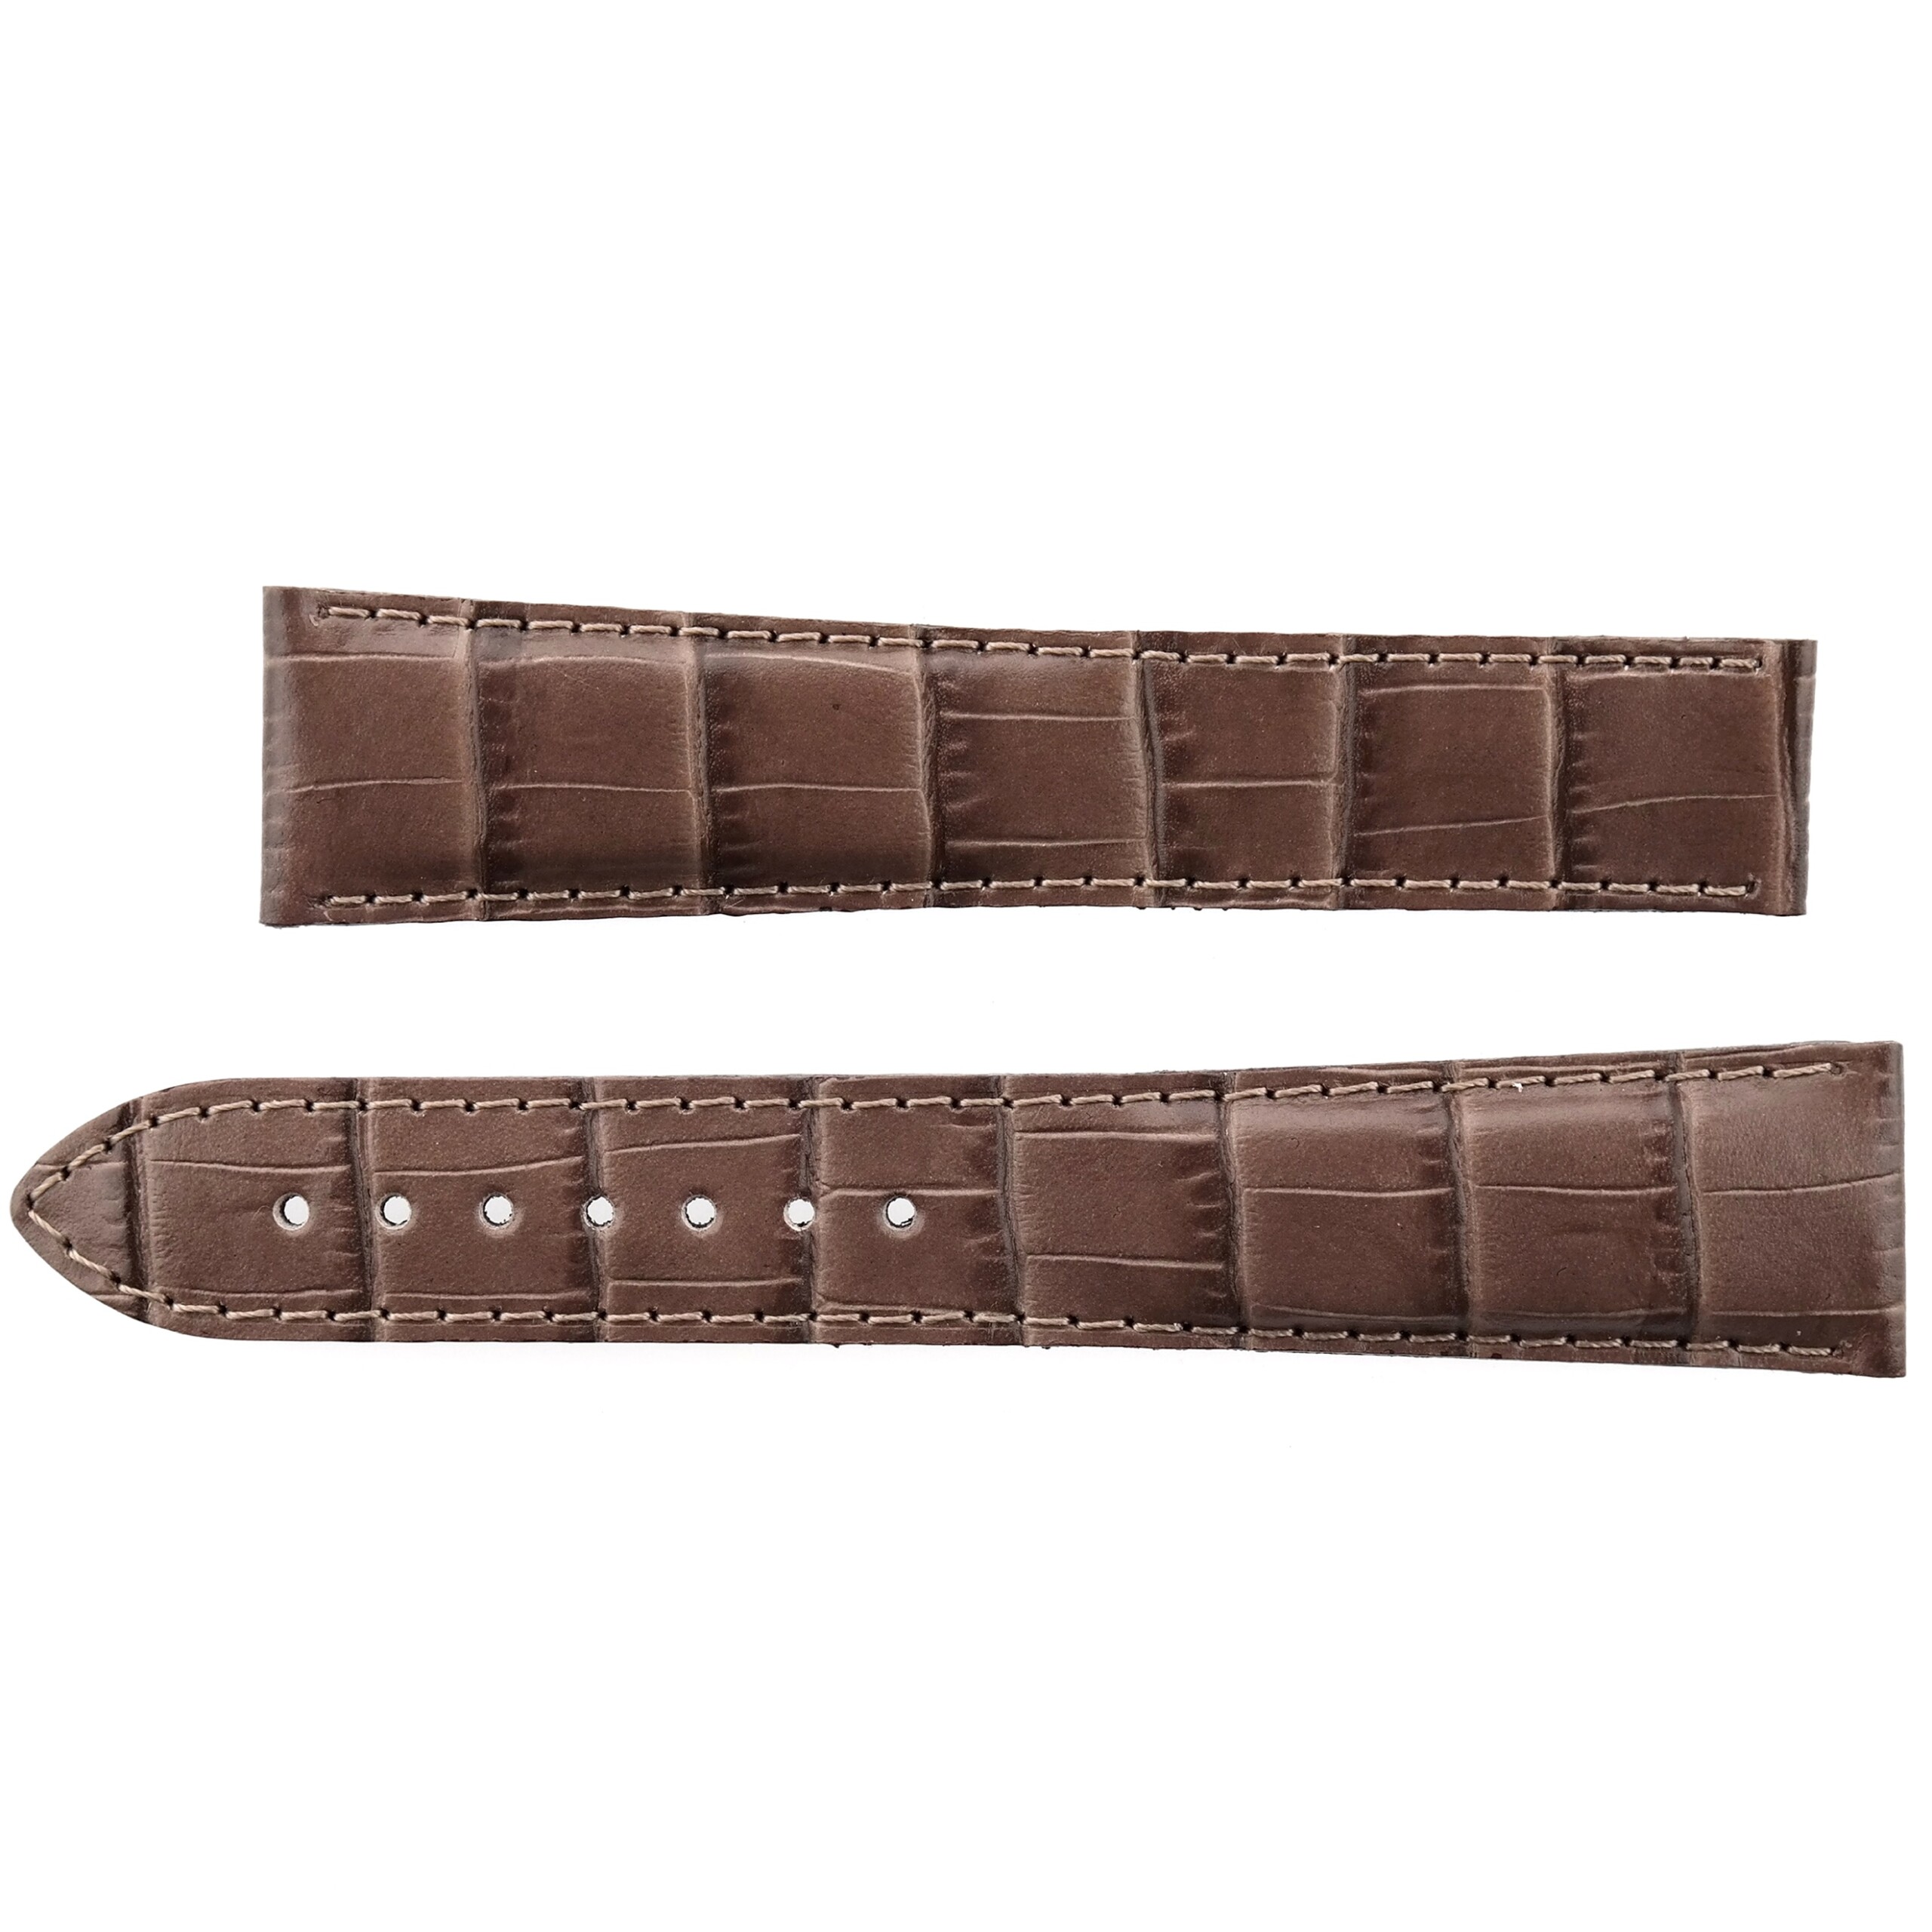 MAURICE LACROIX - Leather Watch Strap - 22/18 100/125 - Swiss Made - Brown - XL